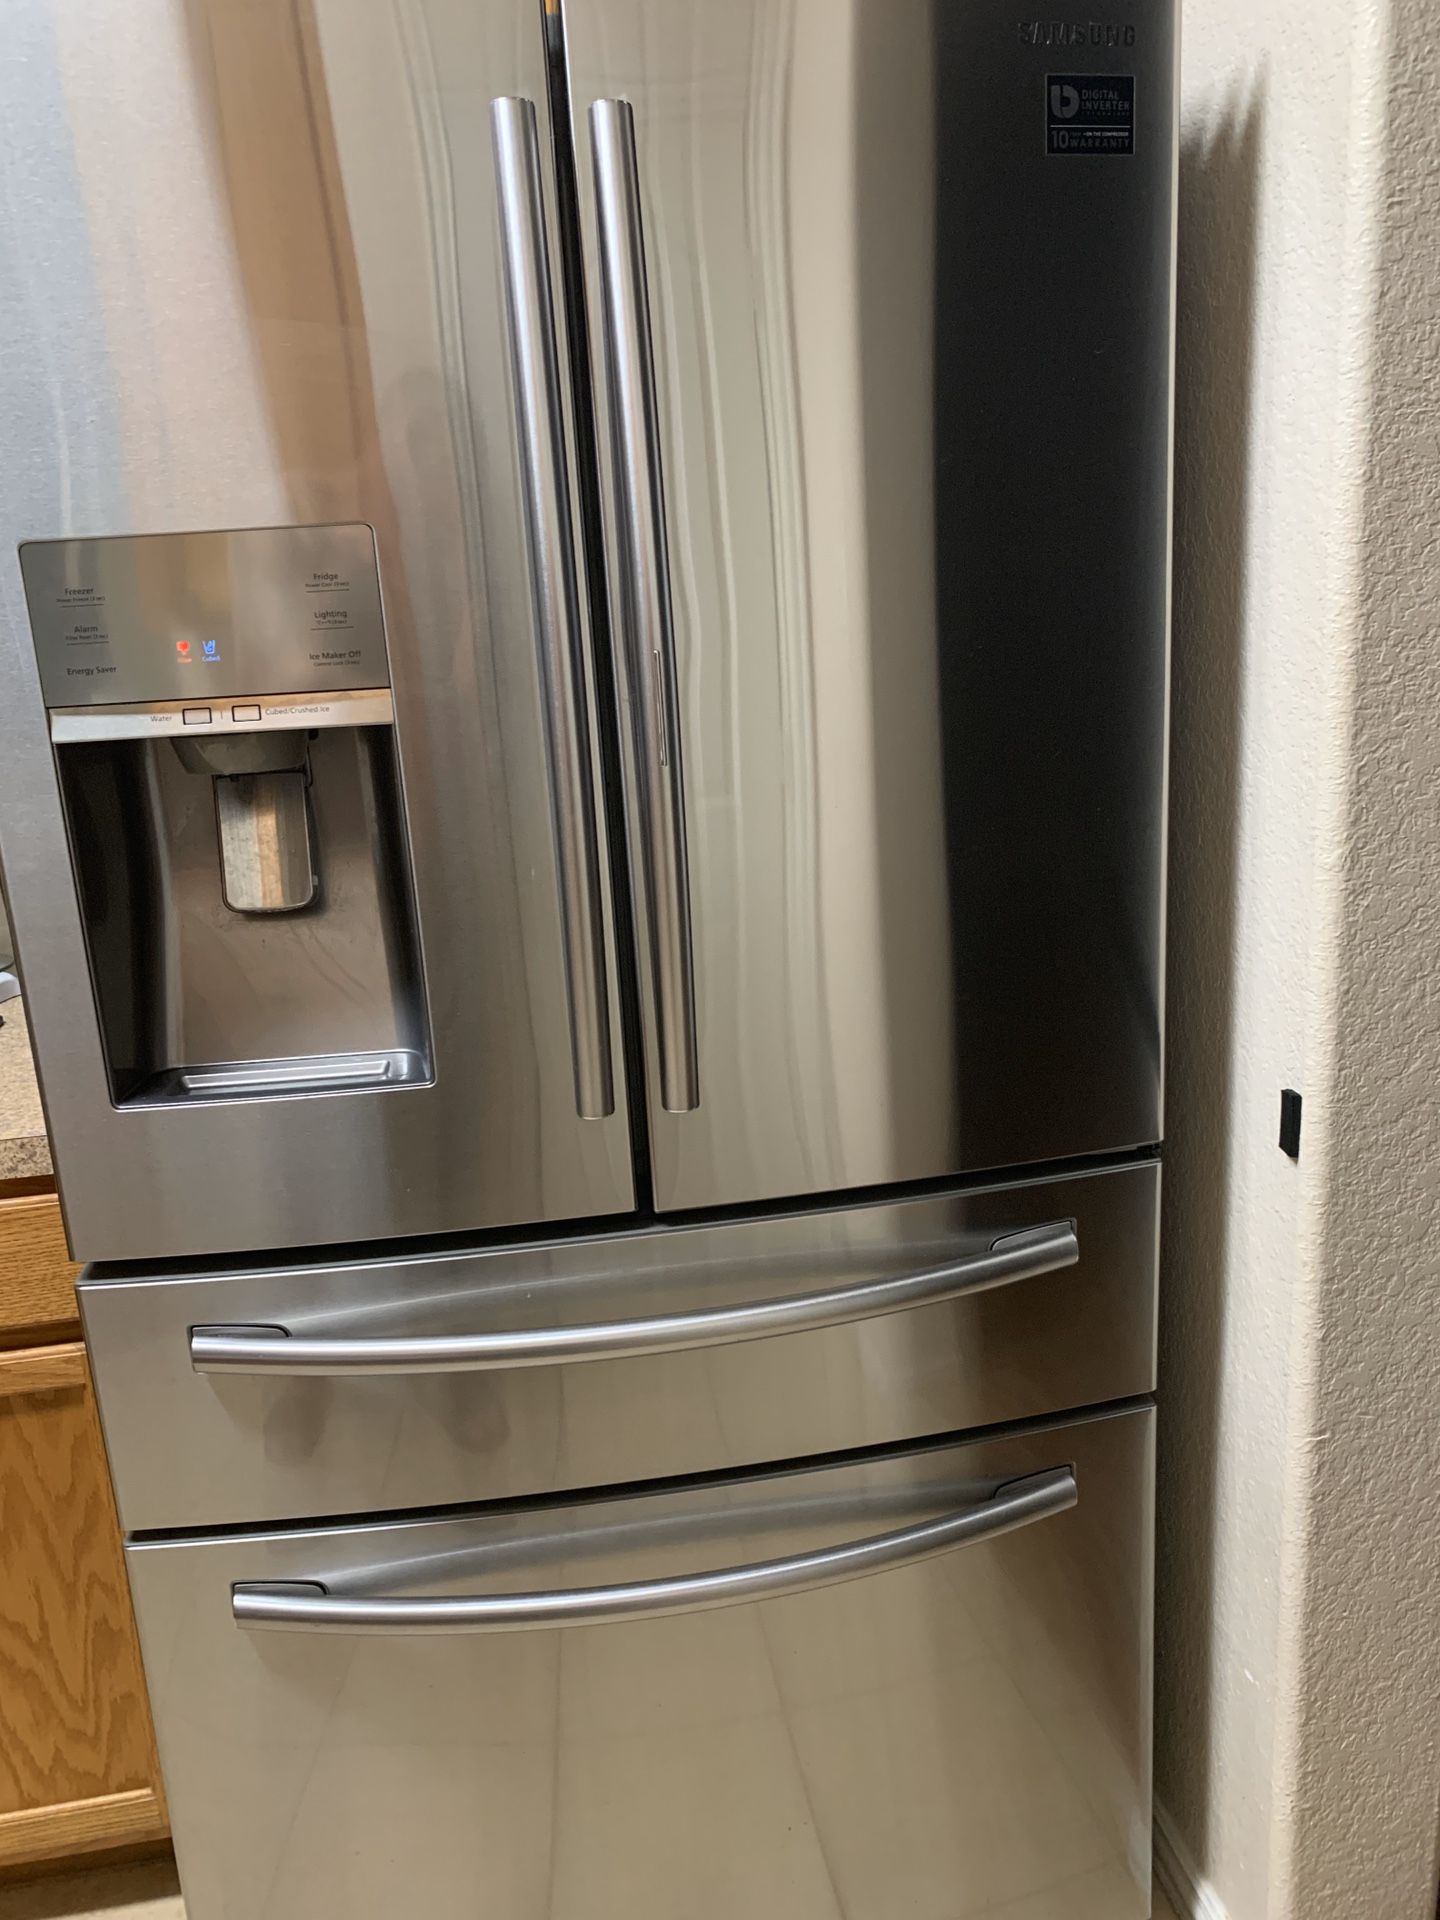 Samsung stainless Appliances